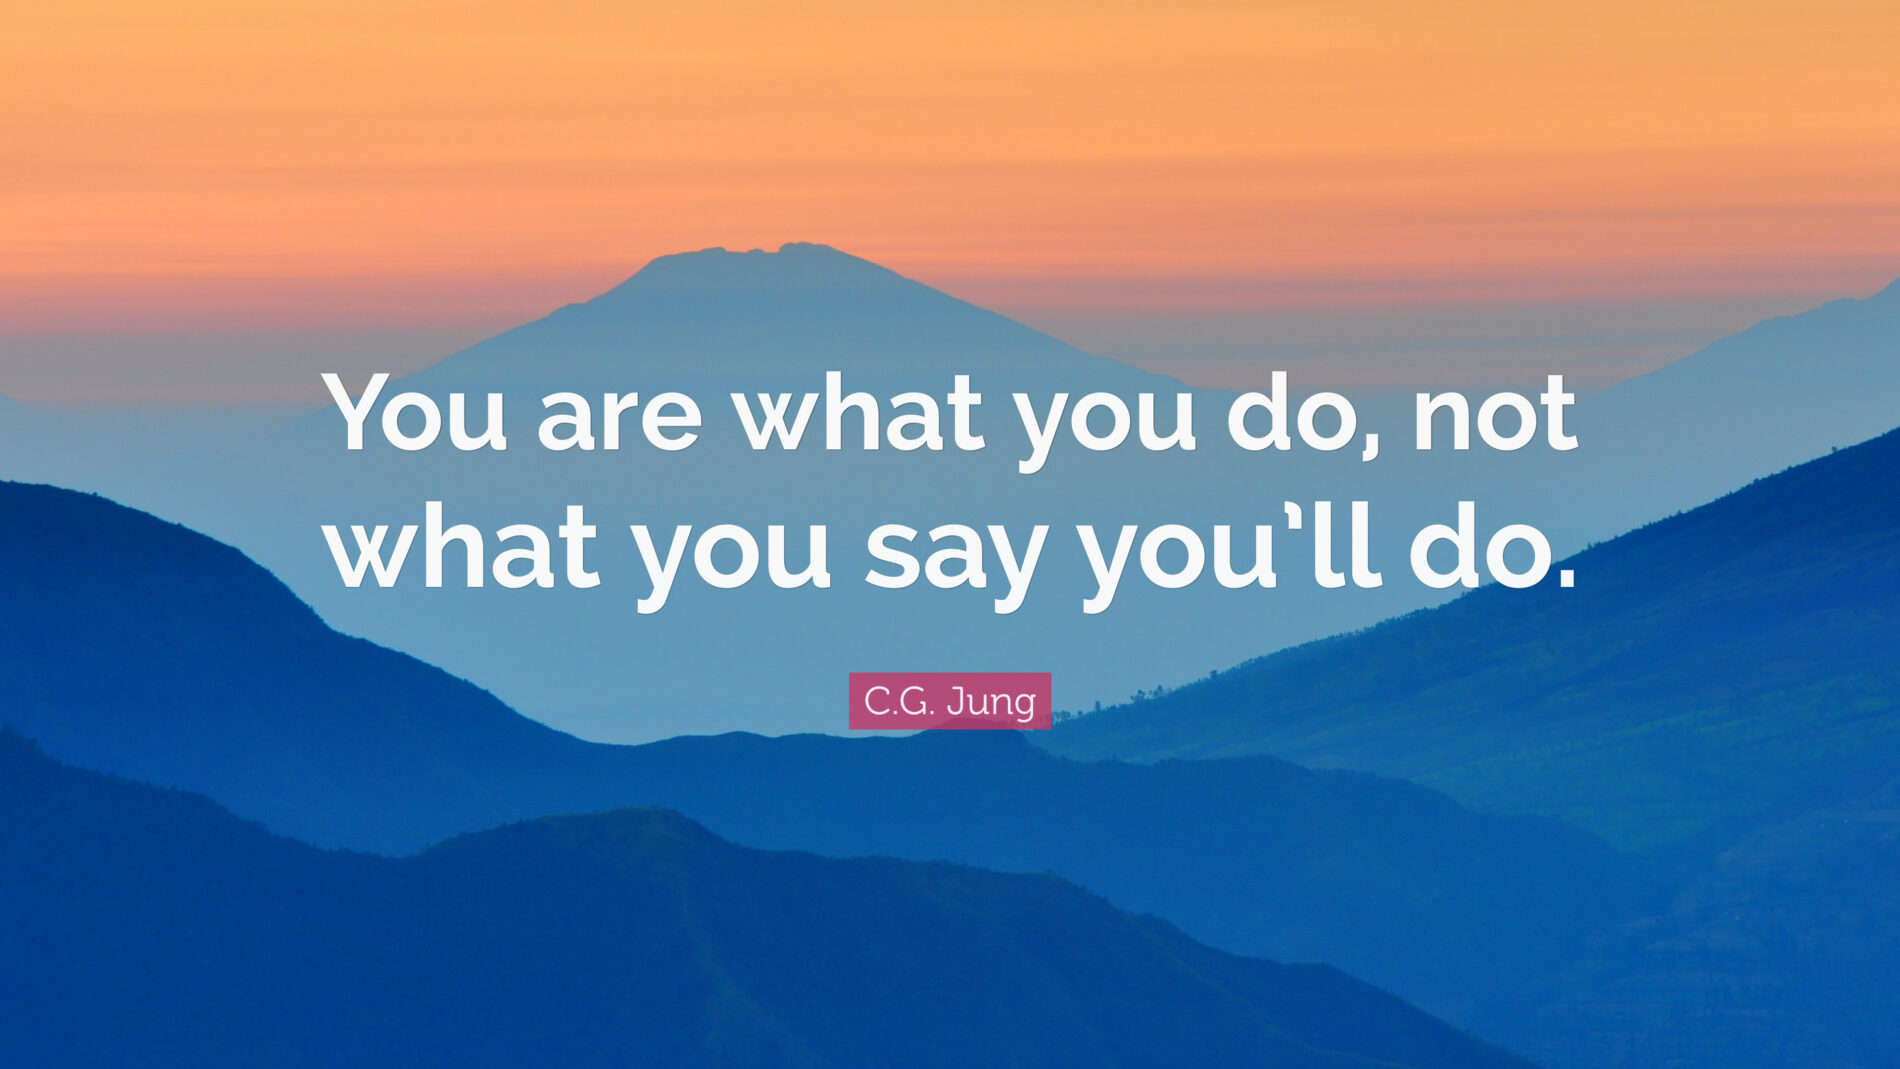 You are what you do. Carl Jung.